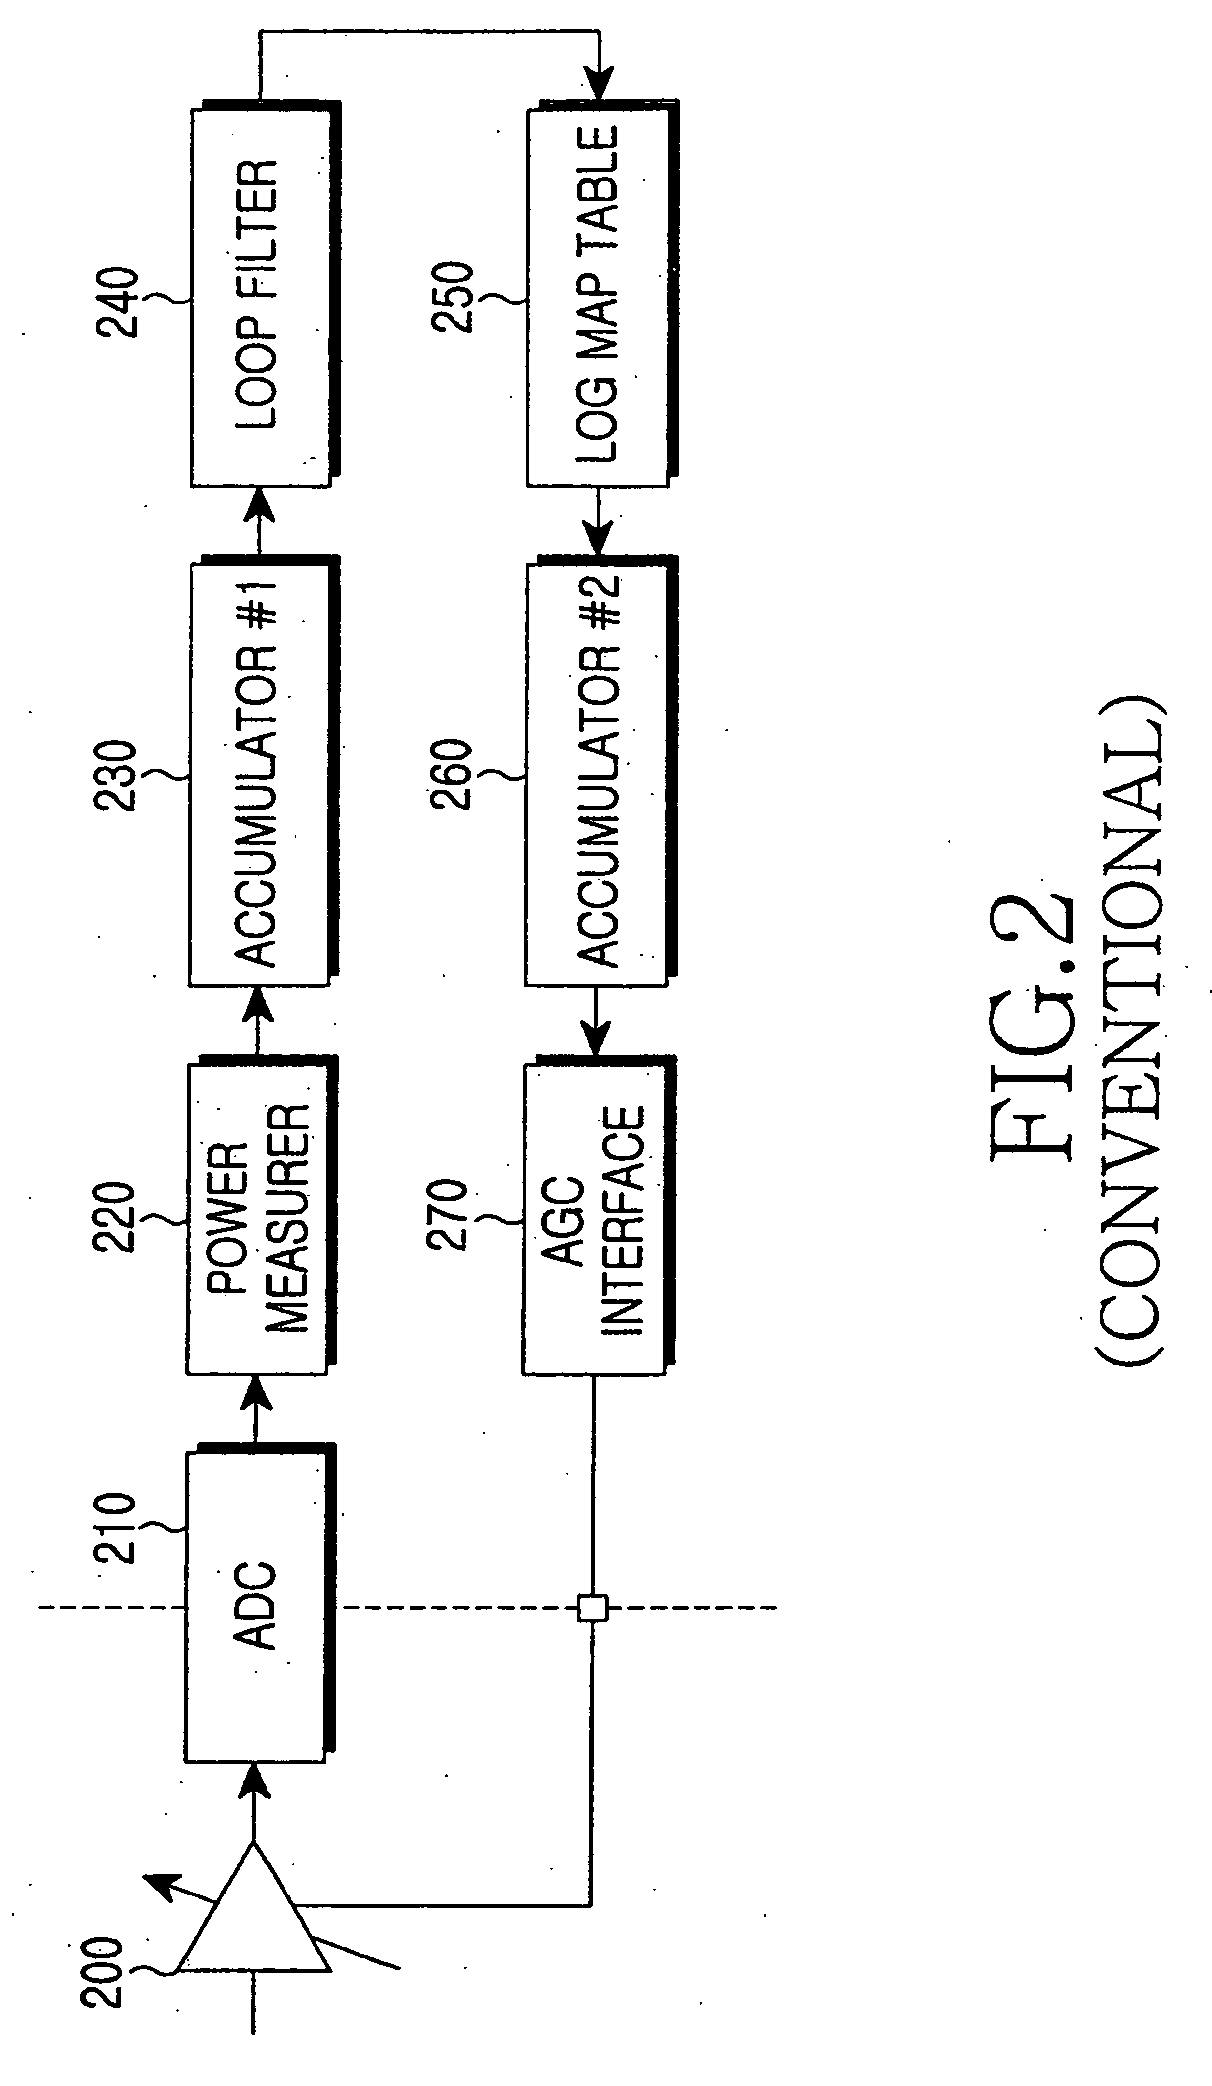 Automatic gain control apparatus and method in an orthogonal frequency division multiple access sytem